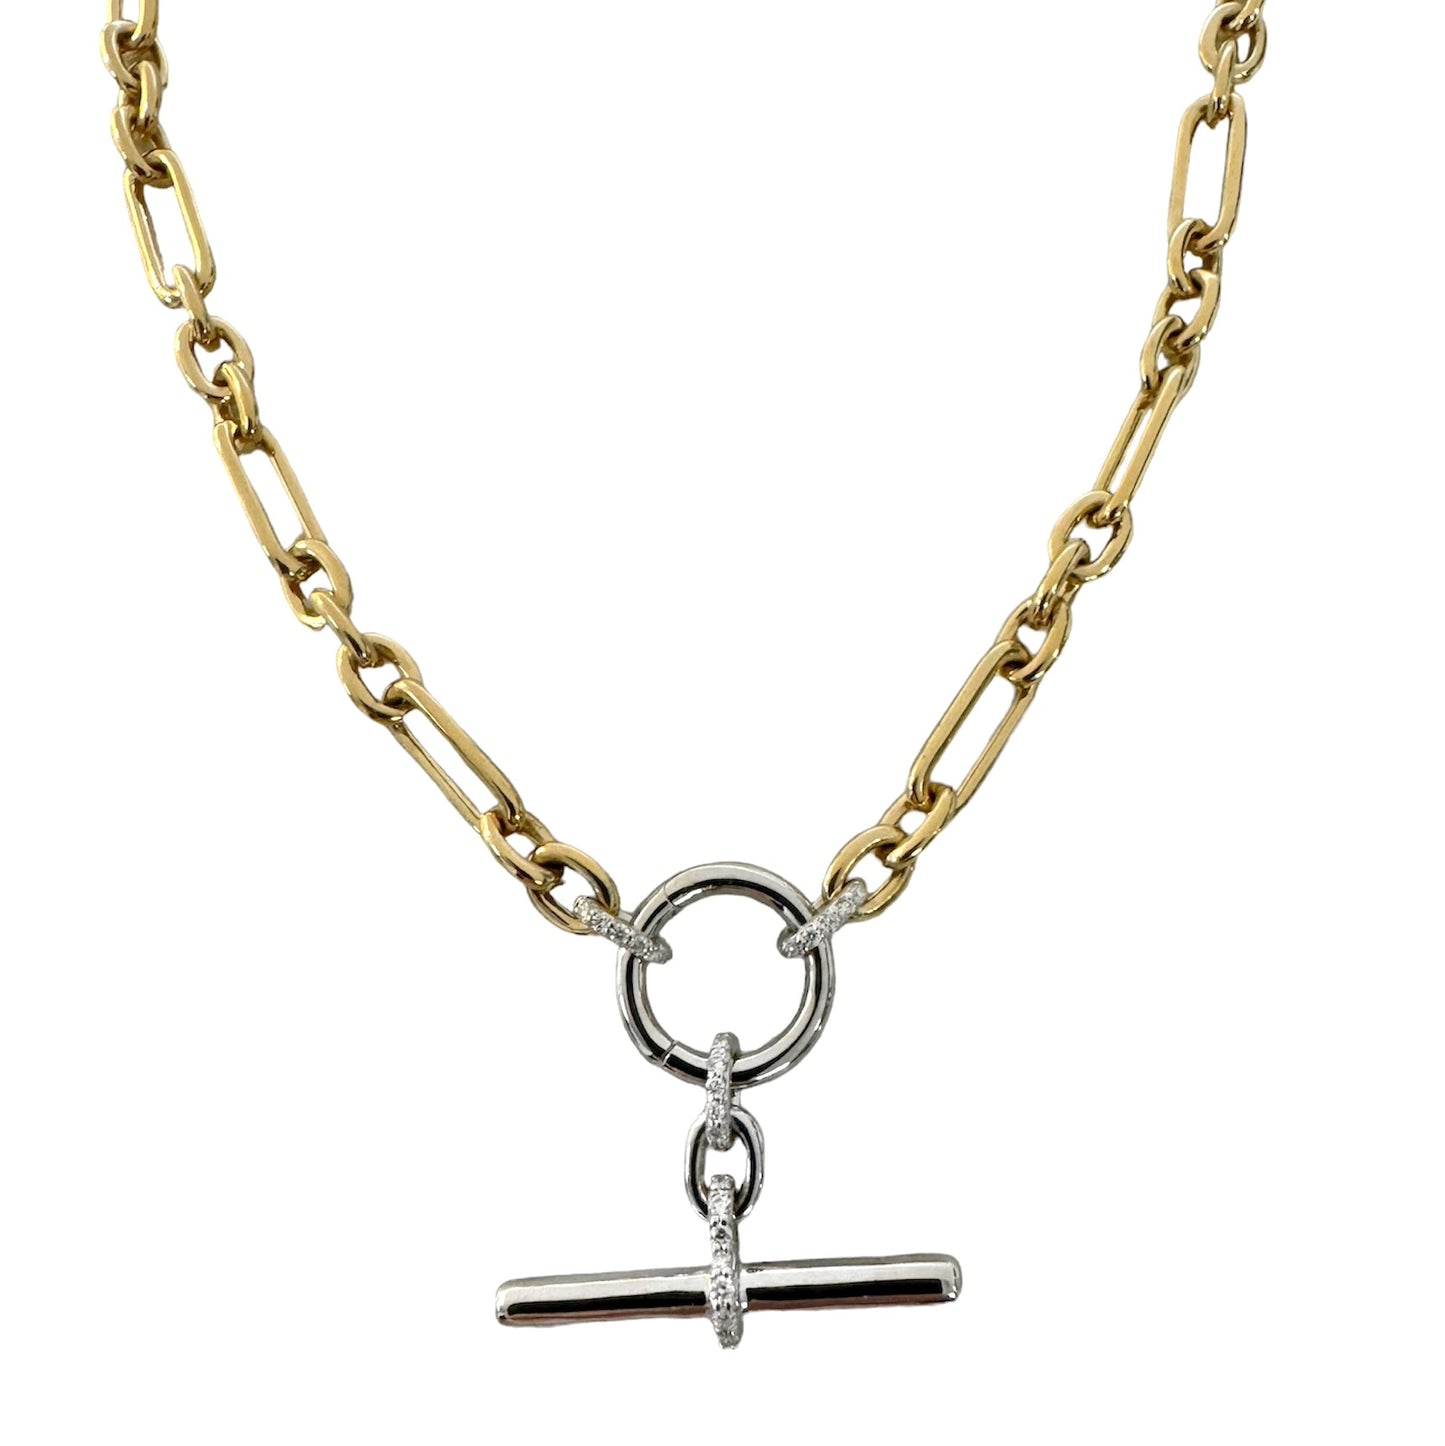 Mixed Link Necklace with Toggle Drop Charm